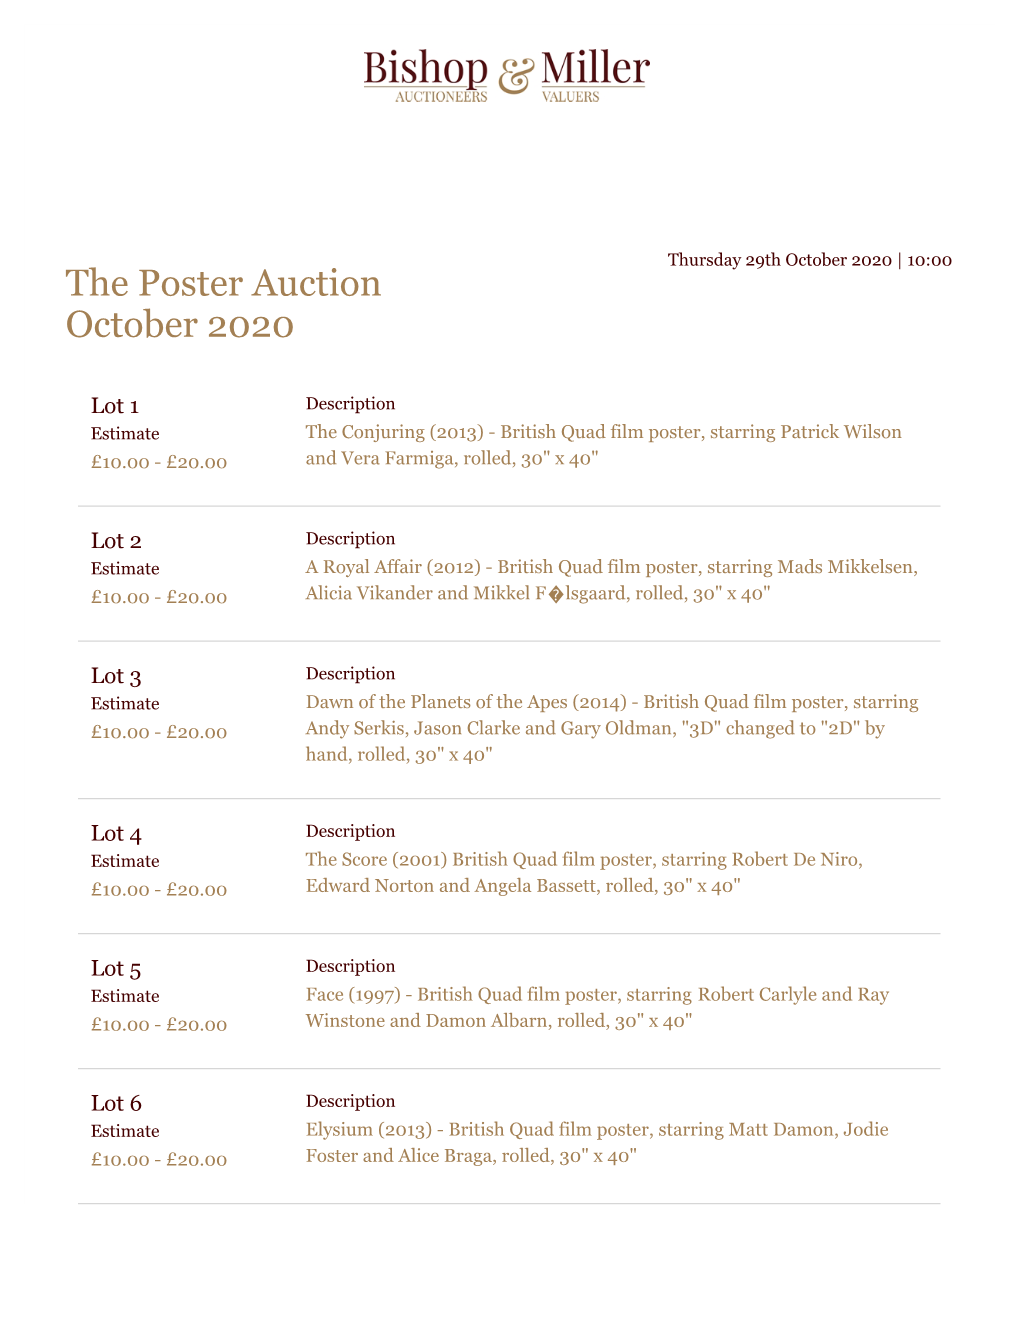 The Poster Auction October 2020